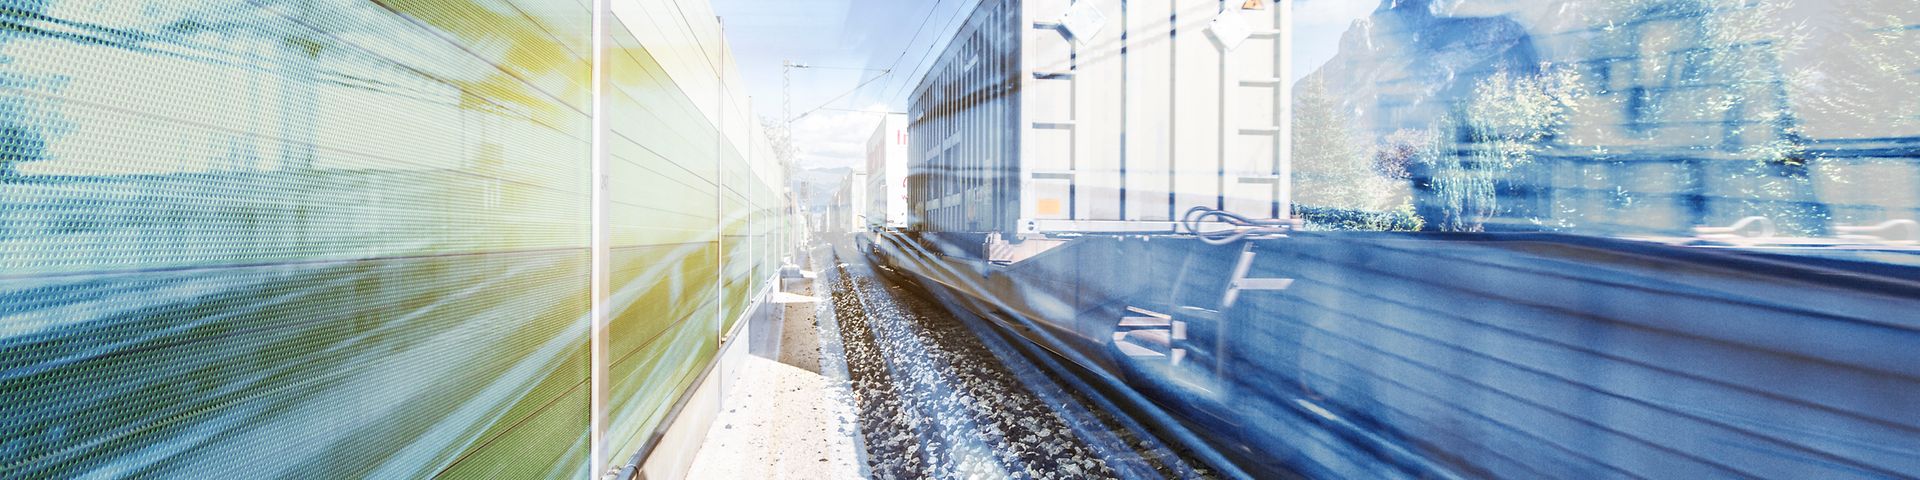 Photomontage with truck next to rails.